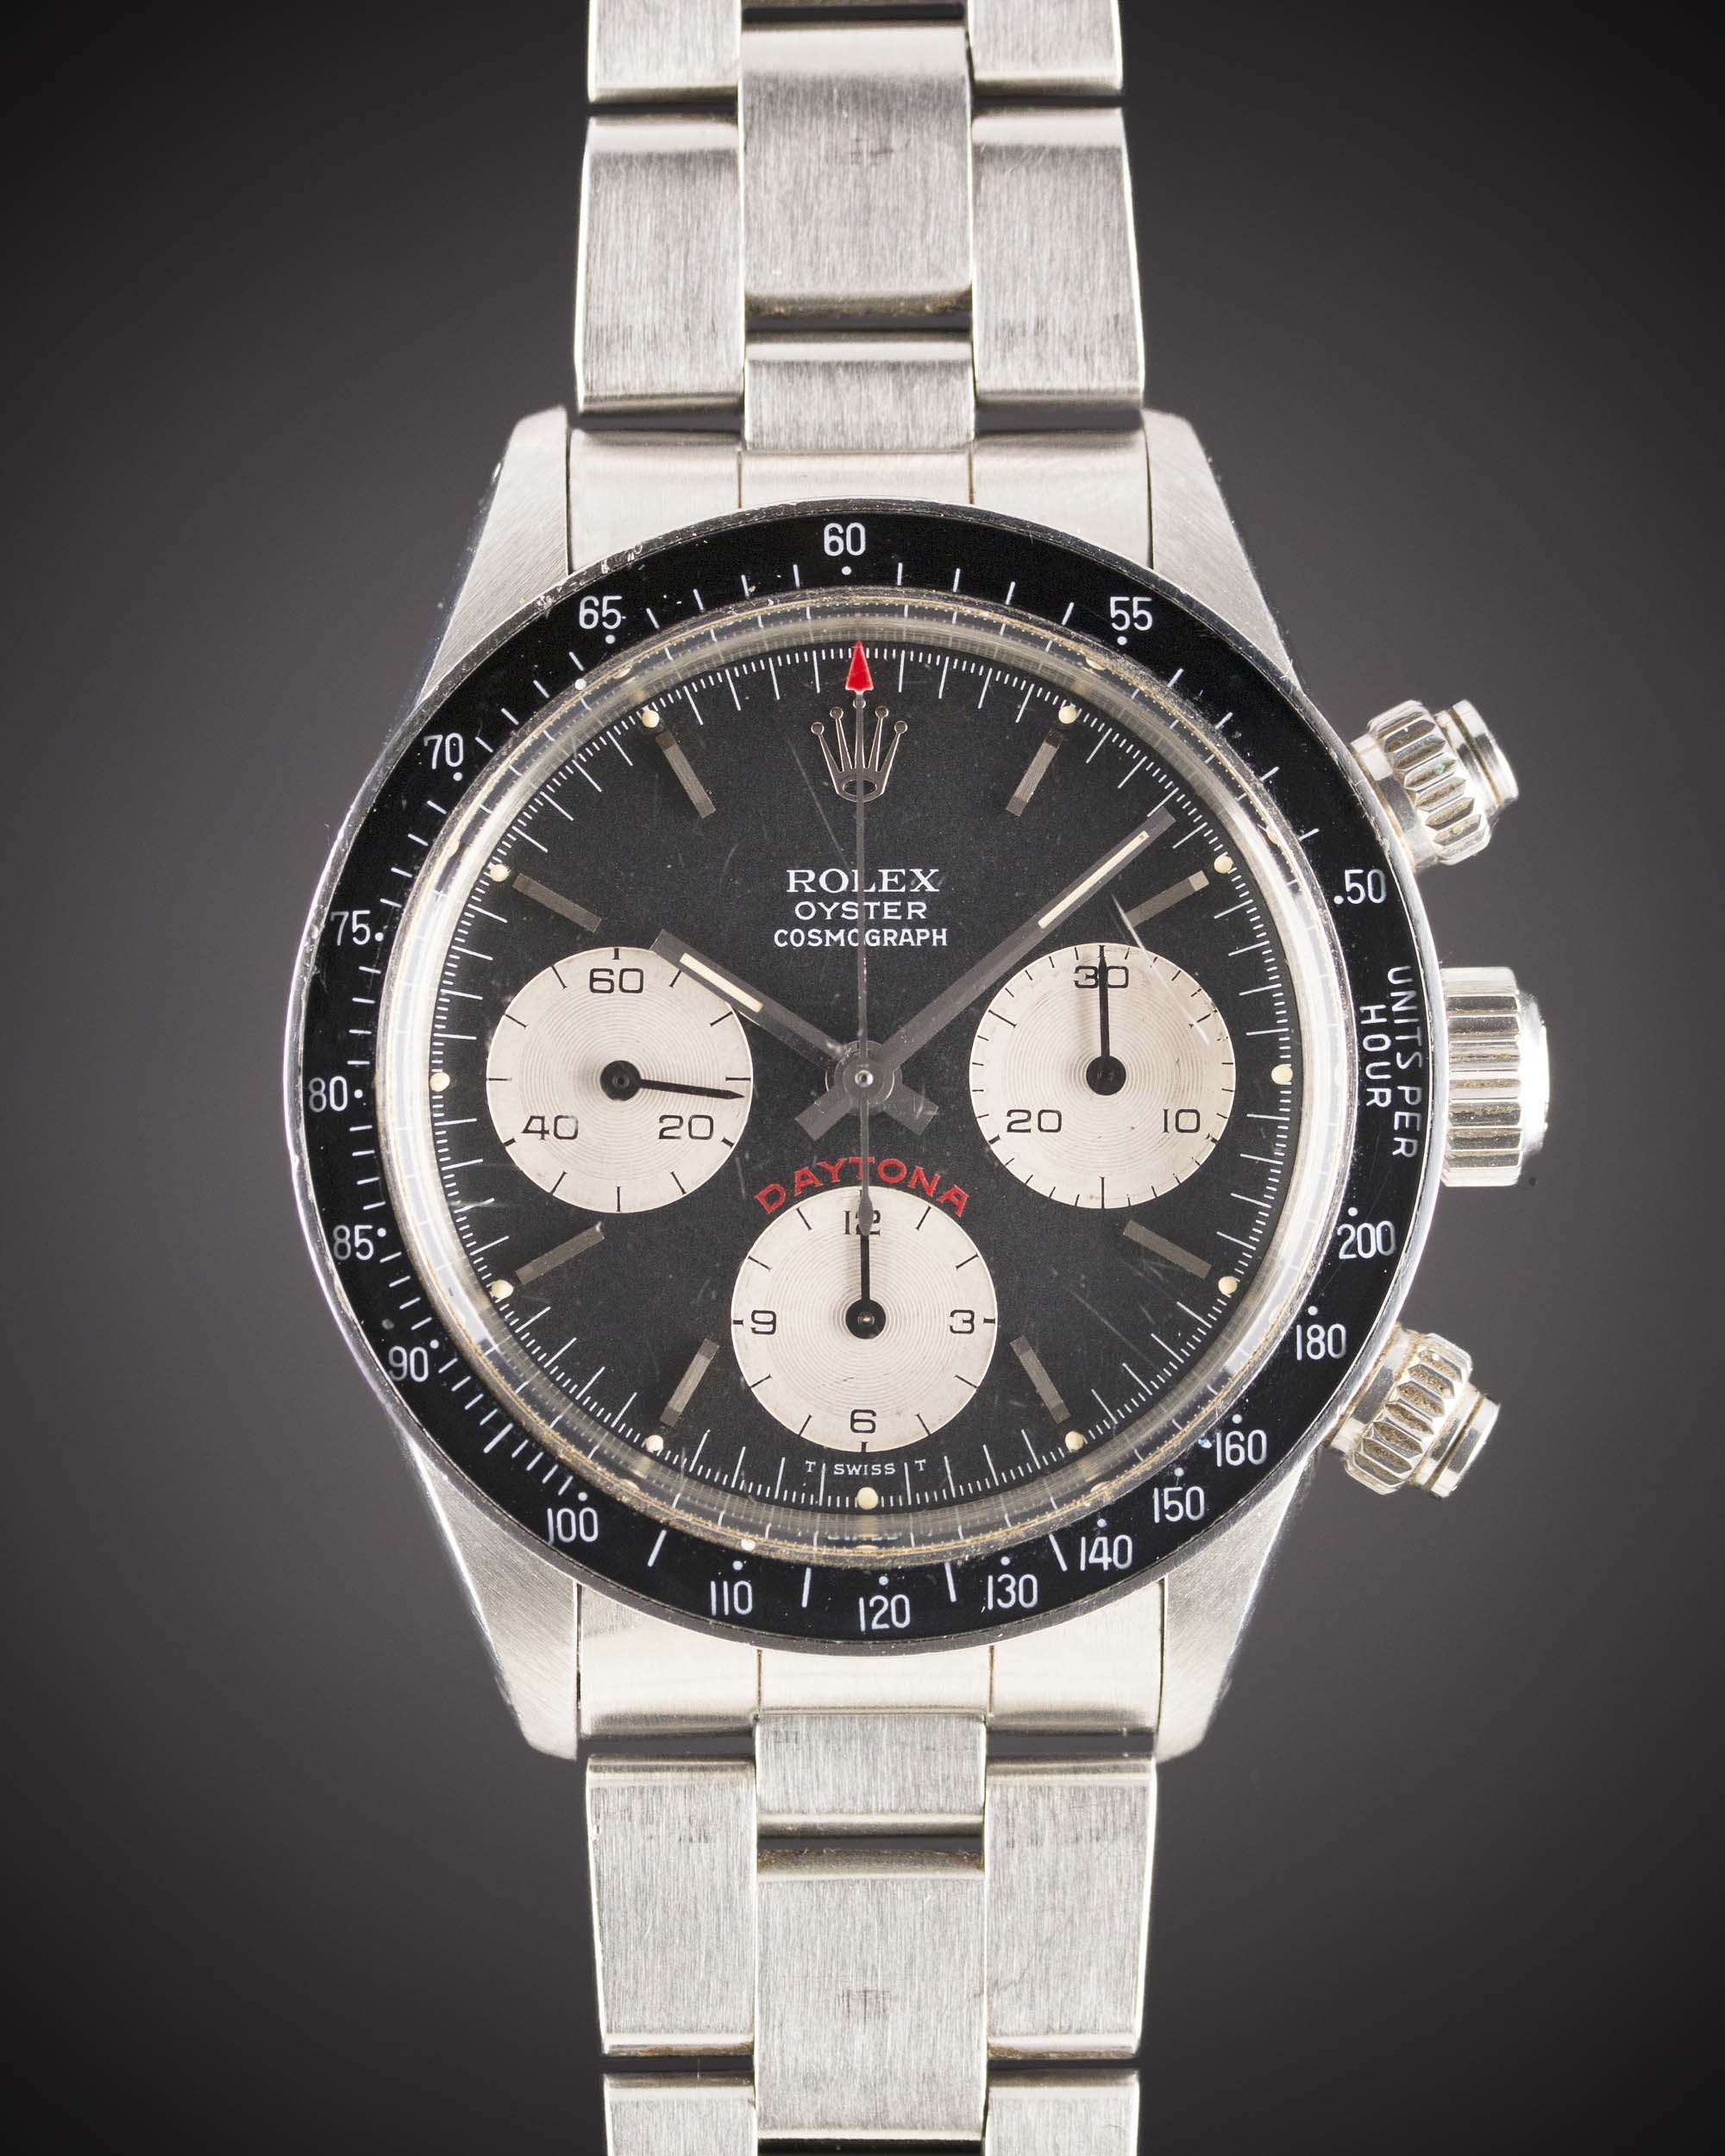 A VERY RARE GENTLEMAN'S STAINLESS STEEL ROLEX OYSTER COSMOGRAPH DAYTONA BRACELET WATCH CIRCA 1979, - Image 2 of 12